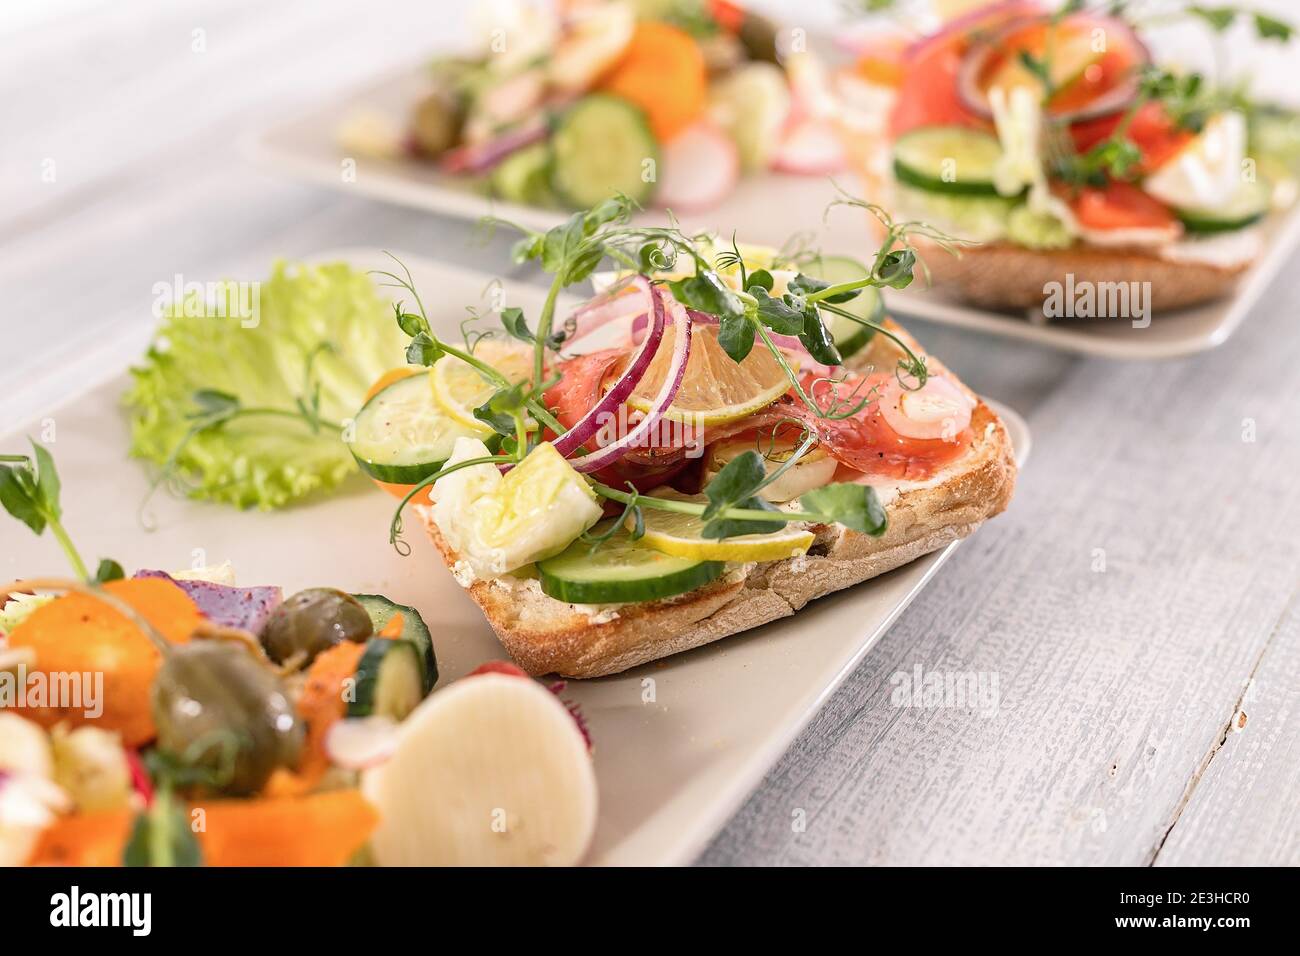 Quick and healthy food recipes. Salad with salmon, vegetables and herbs on Italian ciabatta bread. Mediterranean dish recipes. Selective focus. Stock Photo